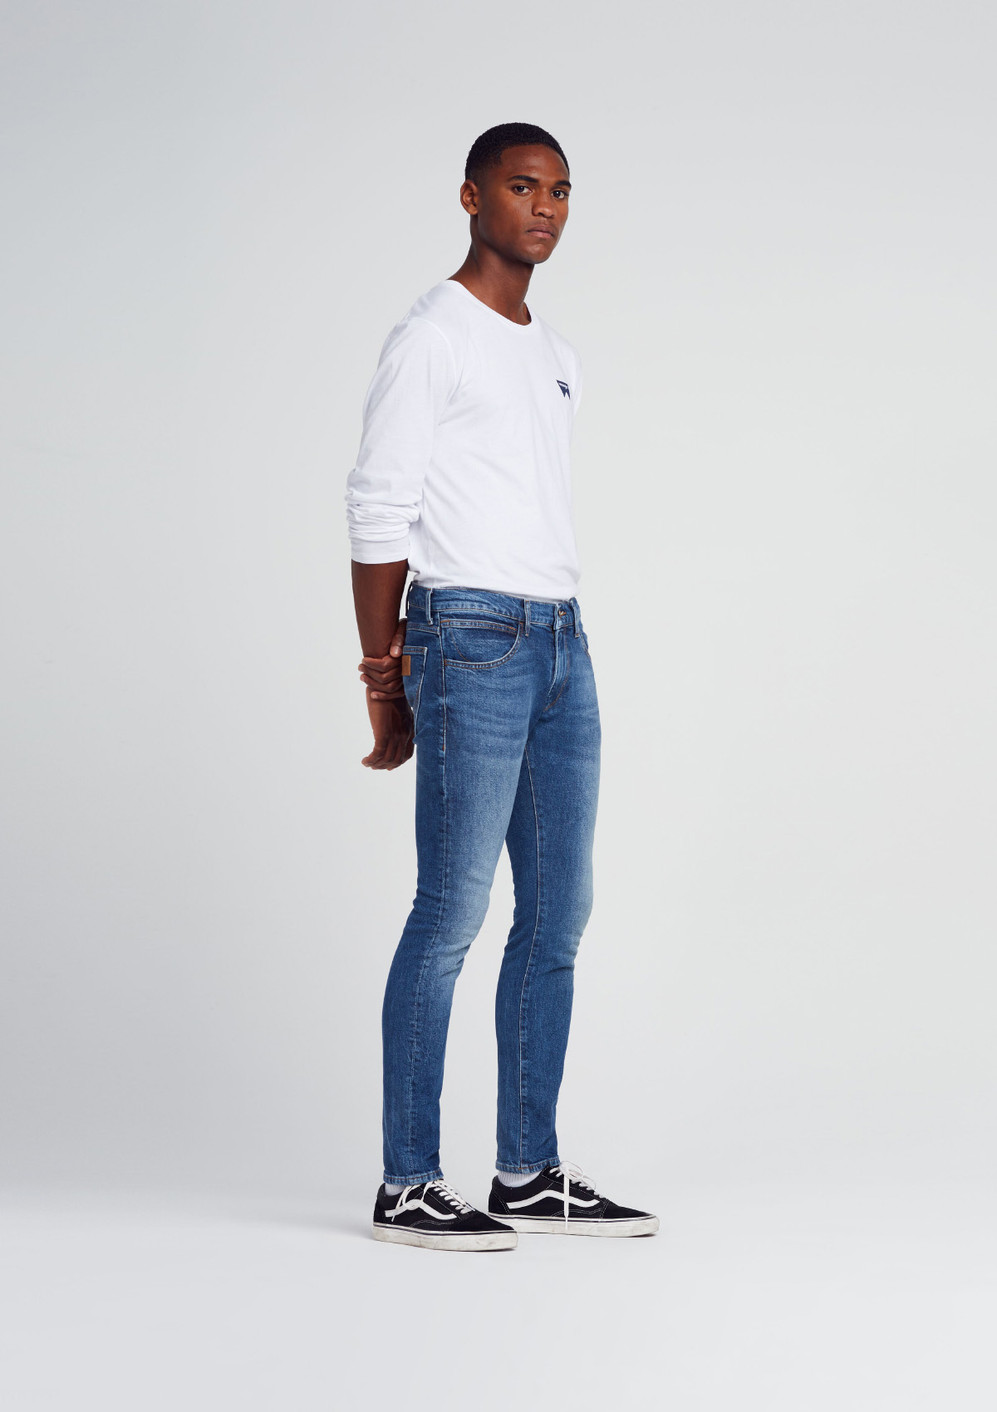 Men's Jeans Fit Guide, Find The Perfect Jeans